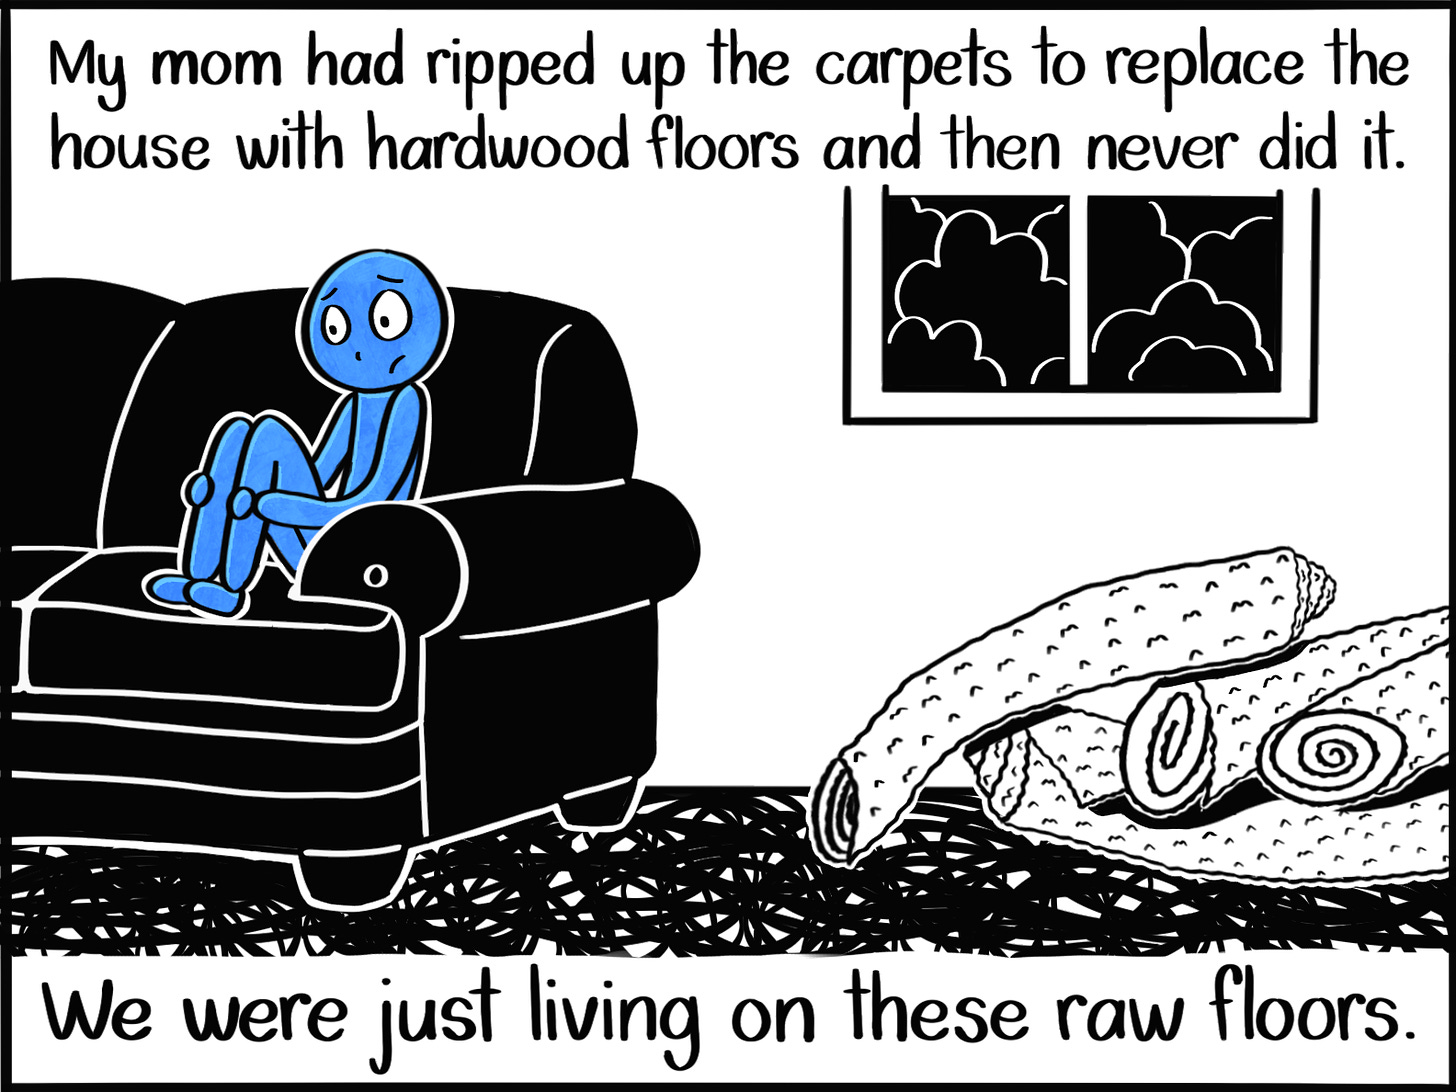 Caption: My mom had ripped up the carpets to replace the house with hardwood floors and then never did it. We were just living on these raw floors. Image: The Blue Person sits on a couch with their knees to their chest, head hung low with a stressed expression on their face. Beside the couch is a messy pile of rolled up carpets, and the floor beneath is made up of scribbles.